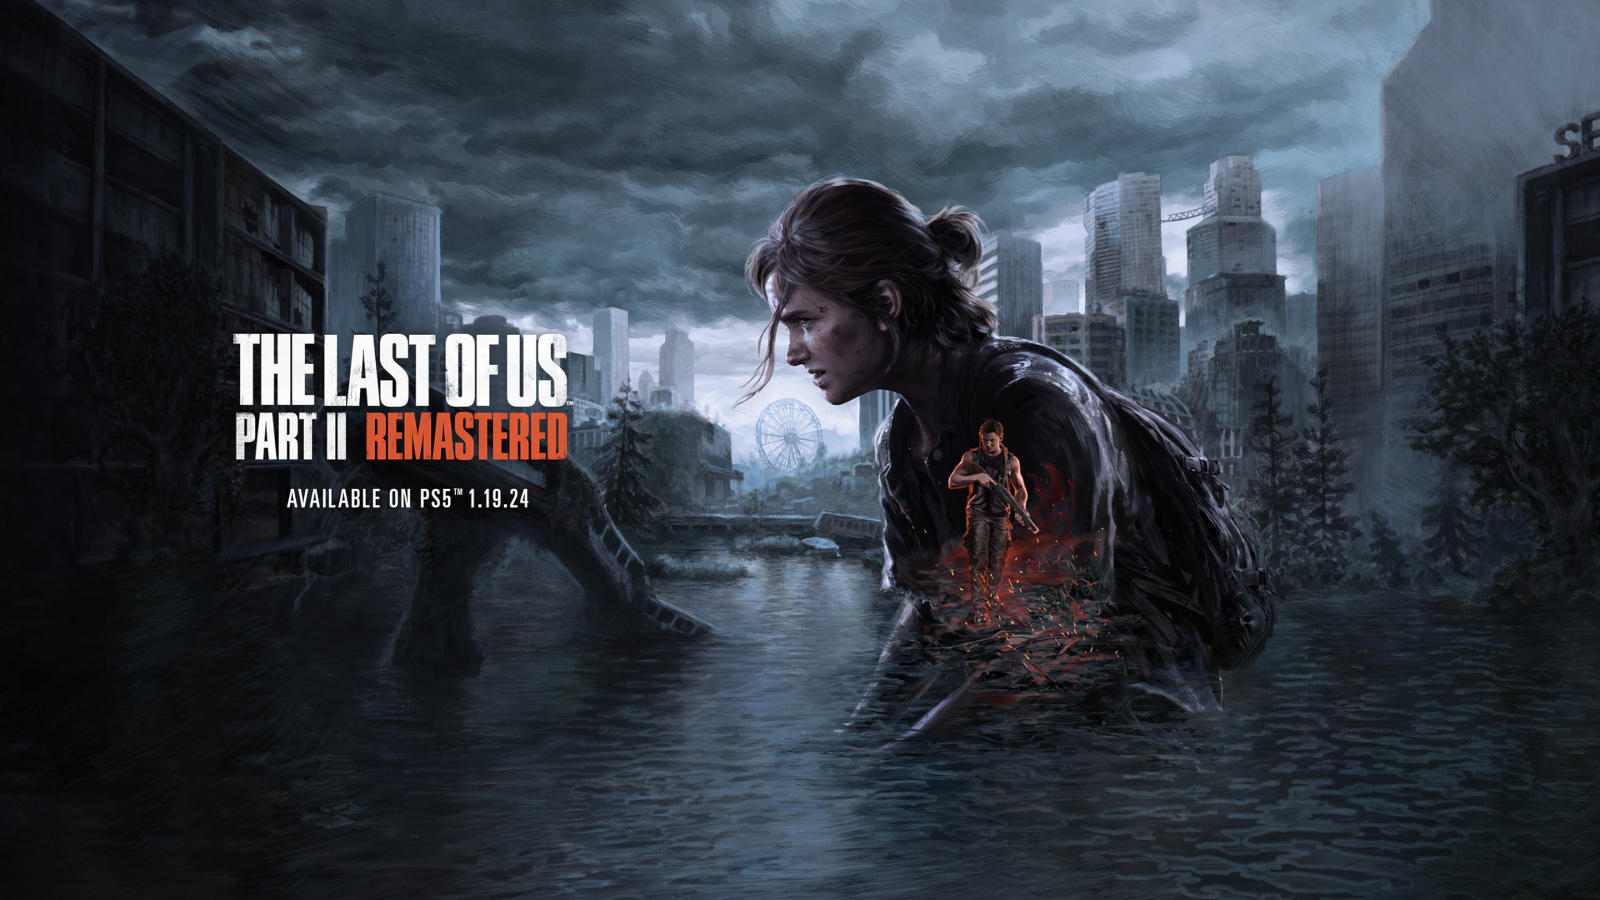 The Last of Us Part II Remastered - Trailer